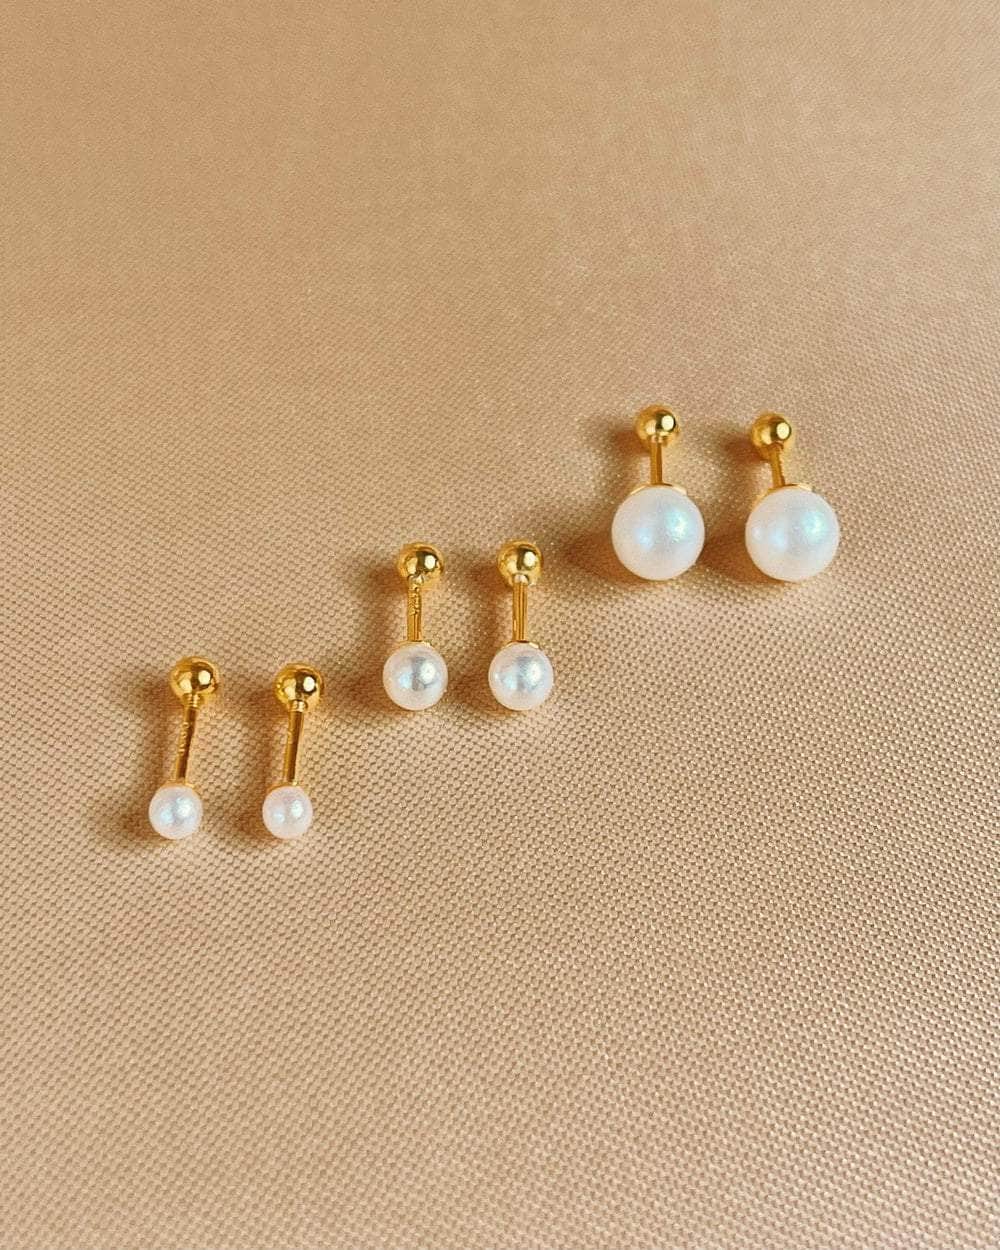 So Dainty Co. Studs Sydney Pearl Gold Studs (Choose 1 — 3mm / 4mm / 6mm) Gold Plated 925 Sterling Silver Jewelry